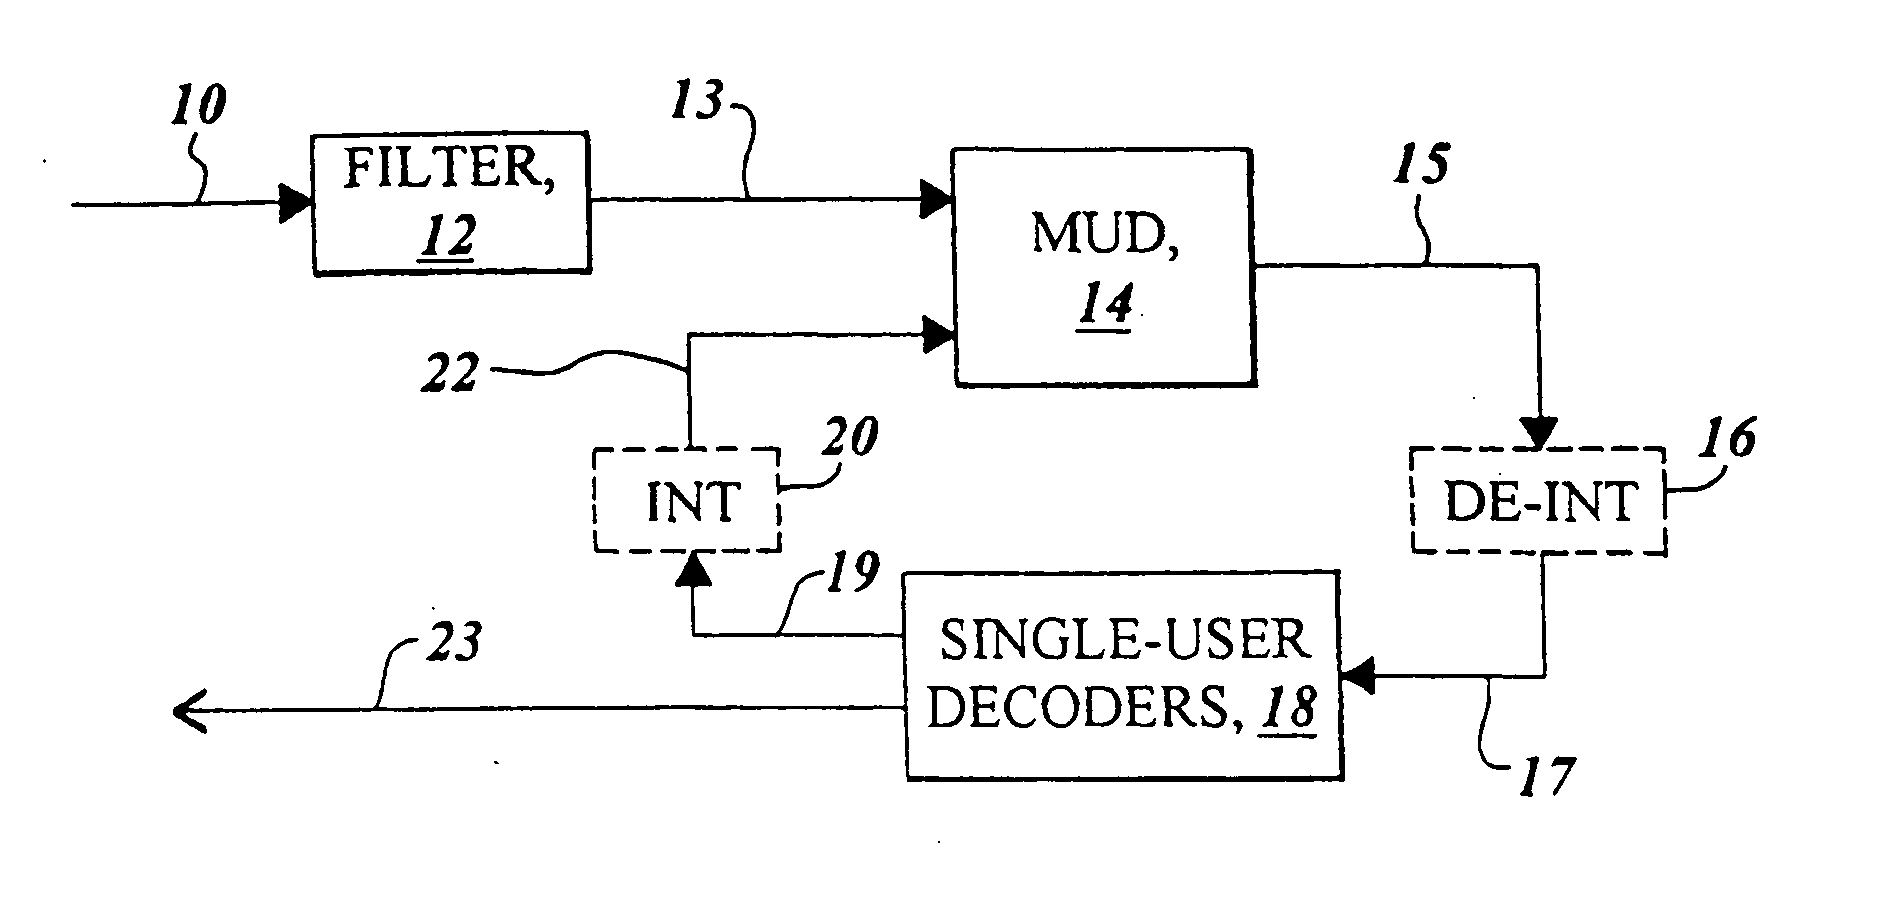 Voting system for improving the performance of single-user decoders within an iterative multi-user detection system